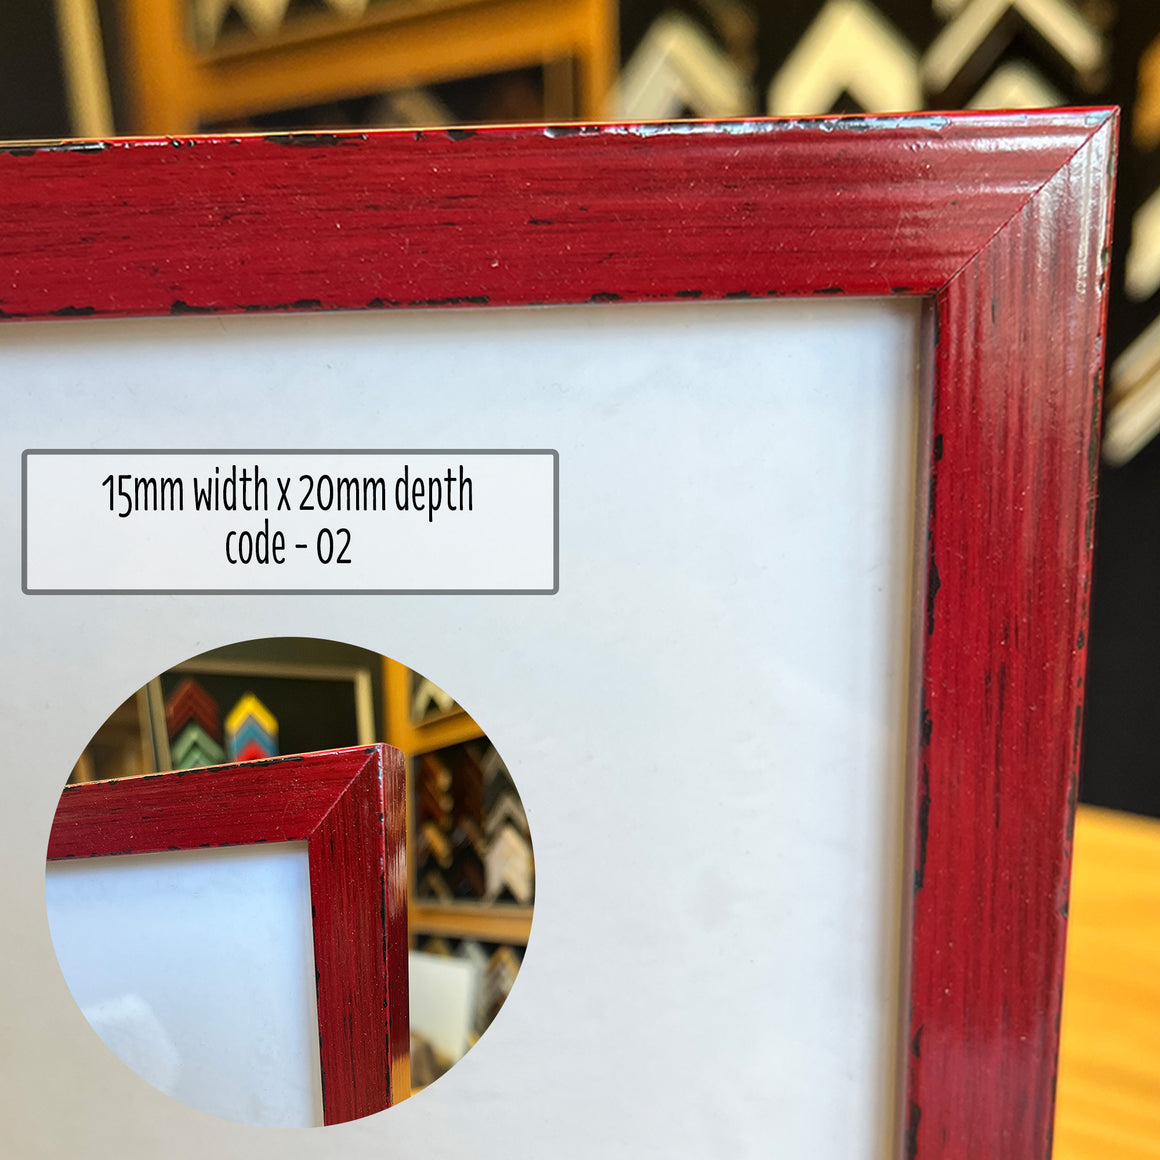 11”x14” Photo frame in distressed Red finish made from quality framing materials. This Picture Frame is perfect for an 11inch x 14inch artwork or photo, or you can add a matboard insert for smaller A5 artwork or 8”x10” or 6”x8” photos